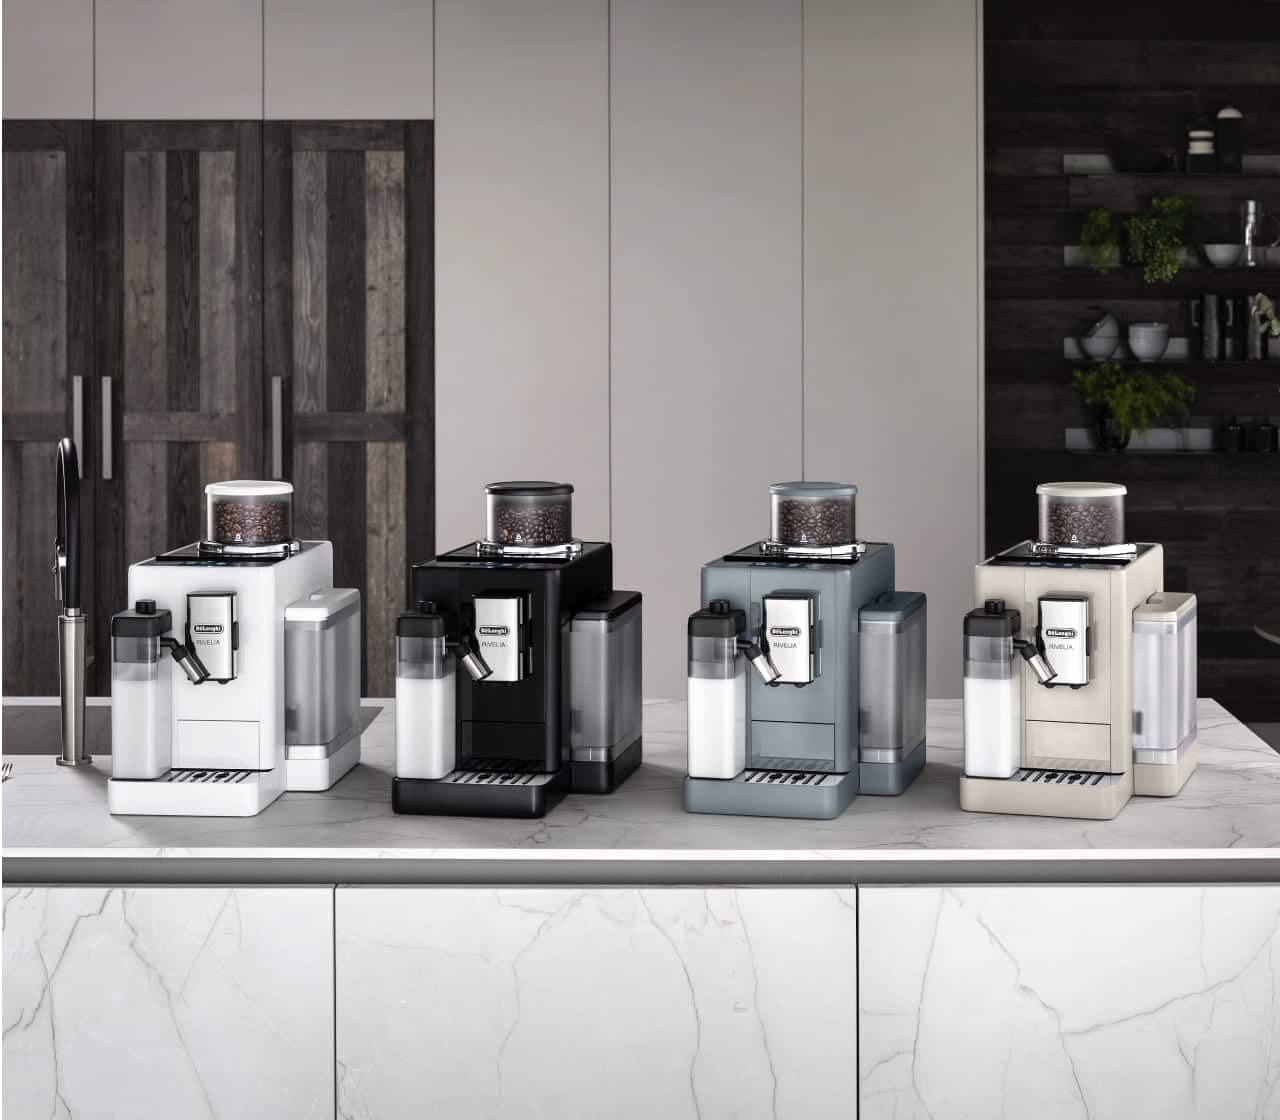 Rivelia wants you to switch to your new coffee experience